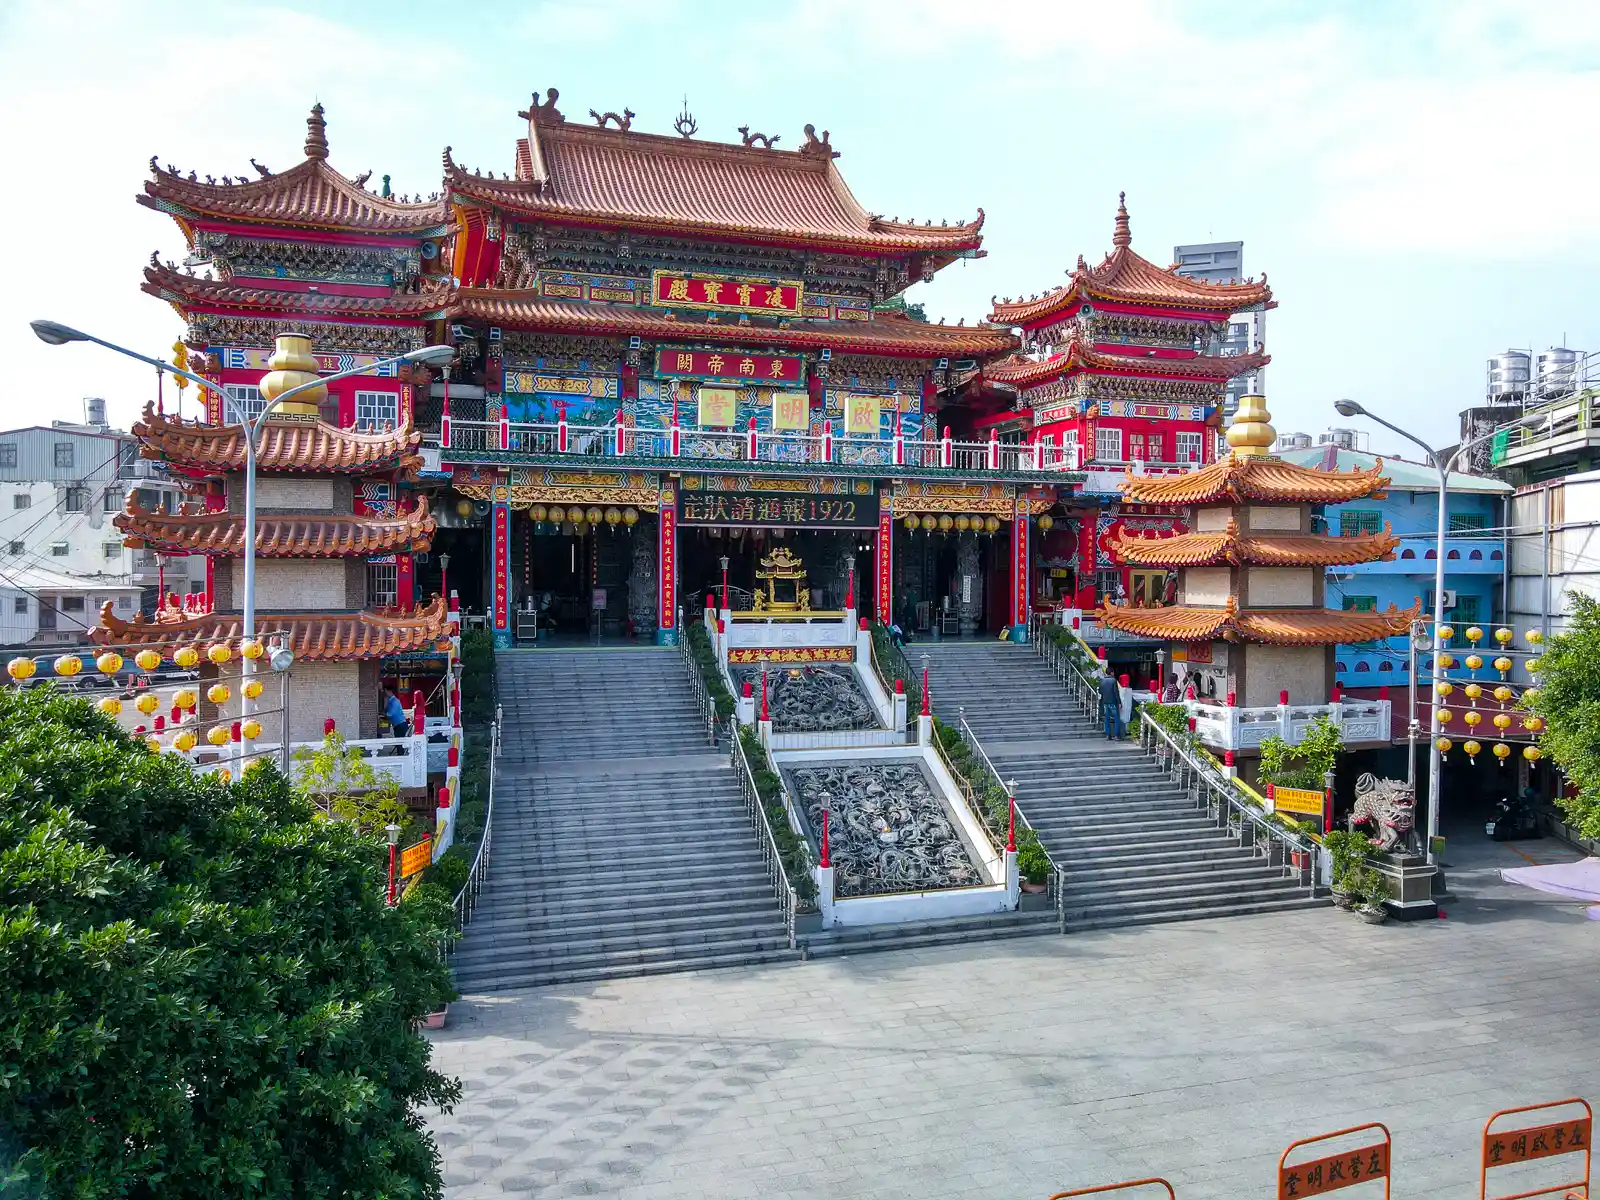 A beautifully decorated three-story temple.